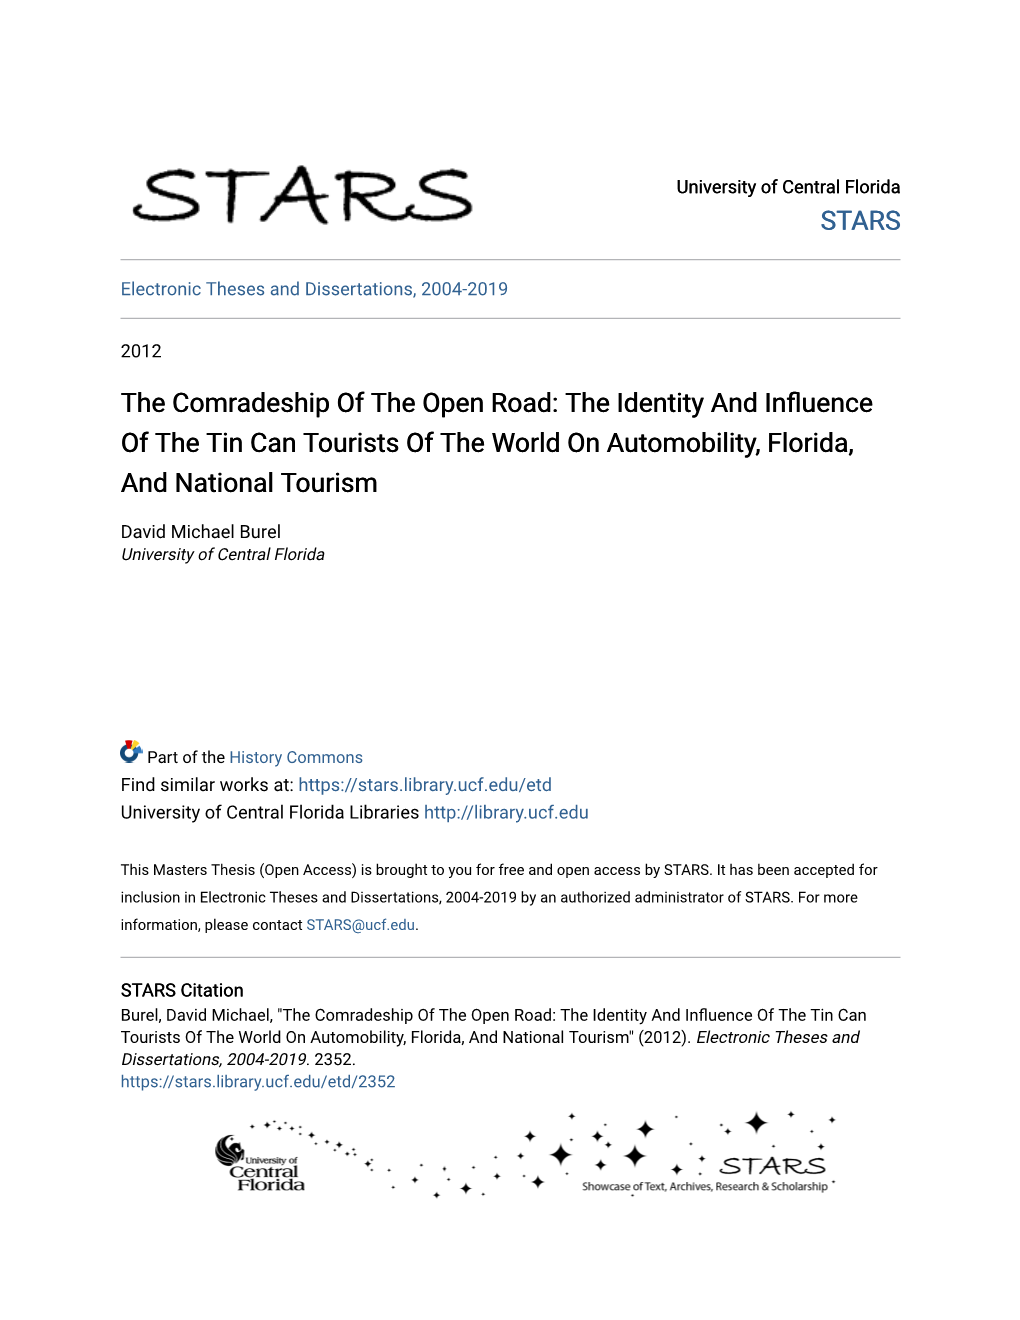 The Comradeship of the Open Road: the Identity and Influence of the Tin Can Tourists of the World on Automobility, Florida, and National Tourism